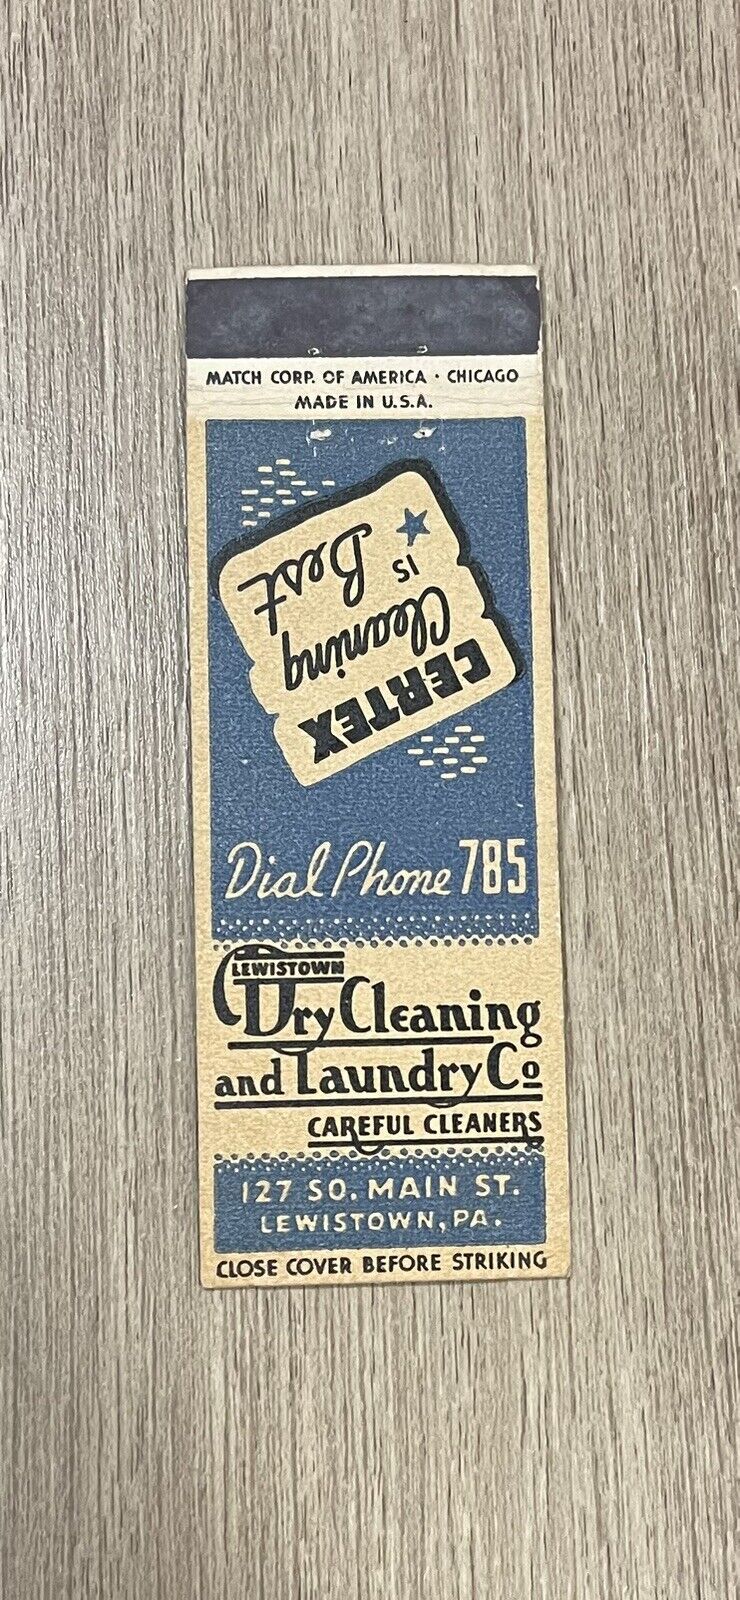 Lewistown Dry Cleaning And Laundry Company Pennsylvania Vintage Matchbook Cover